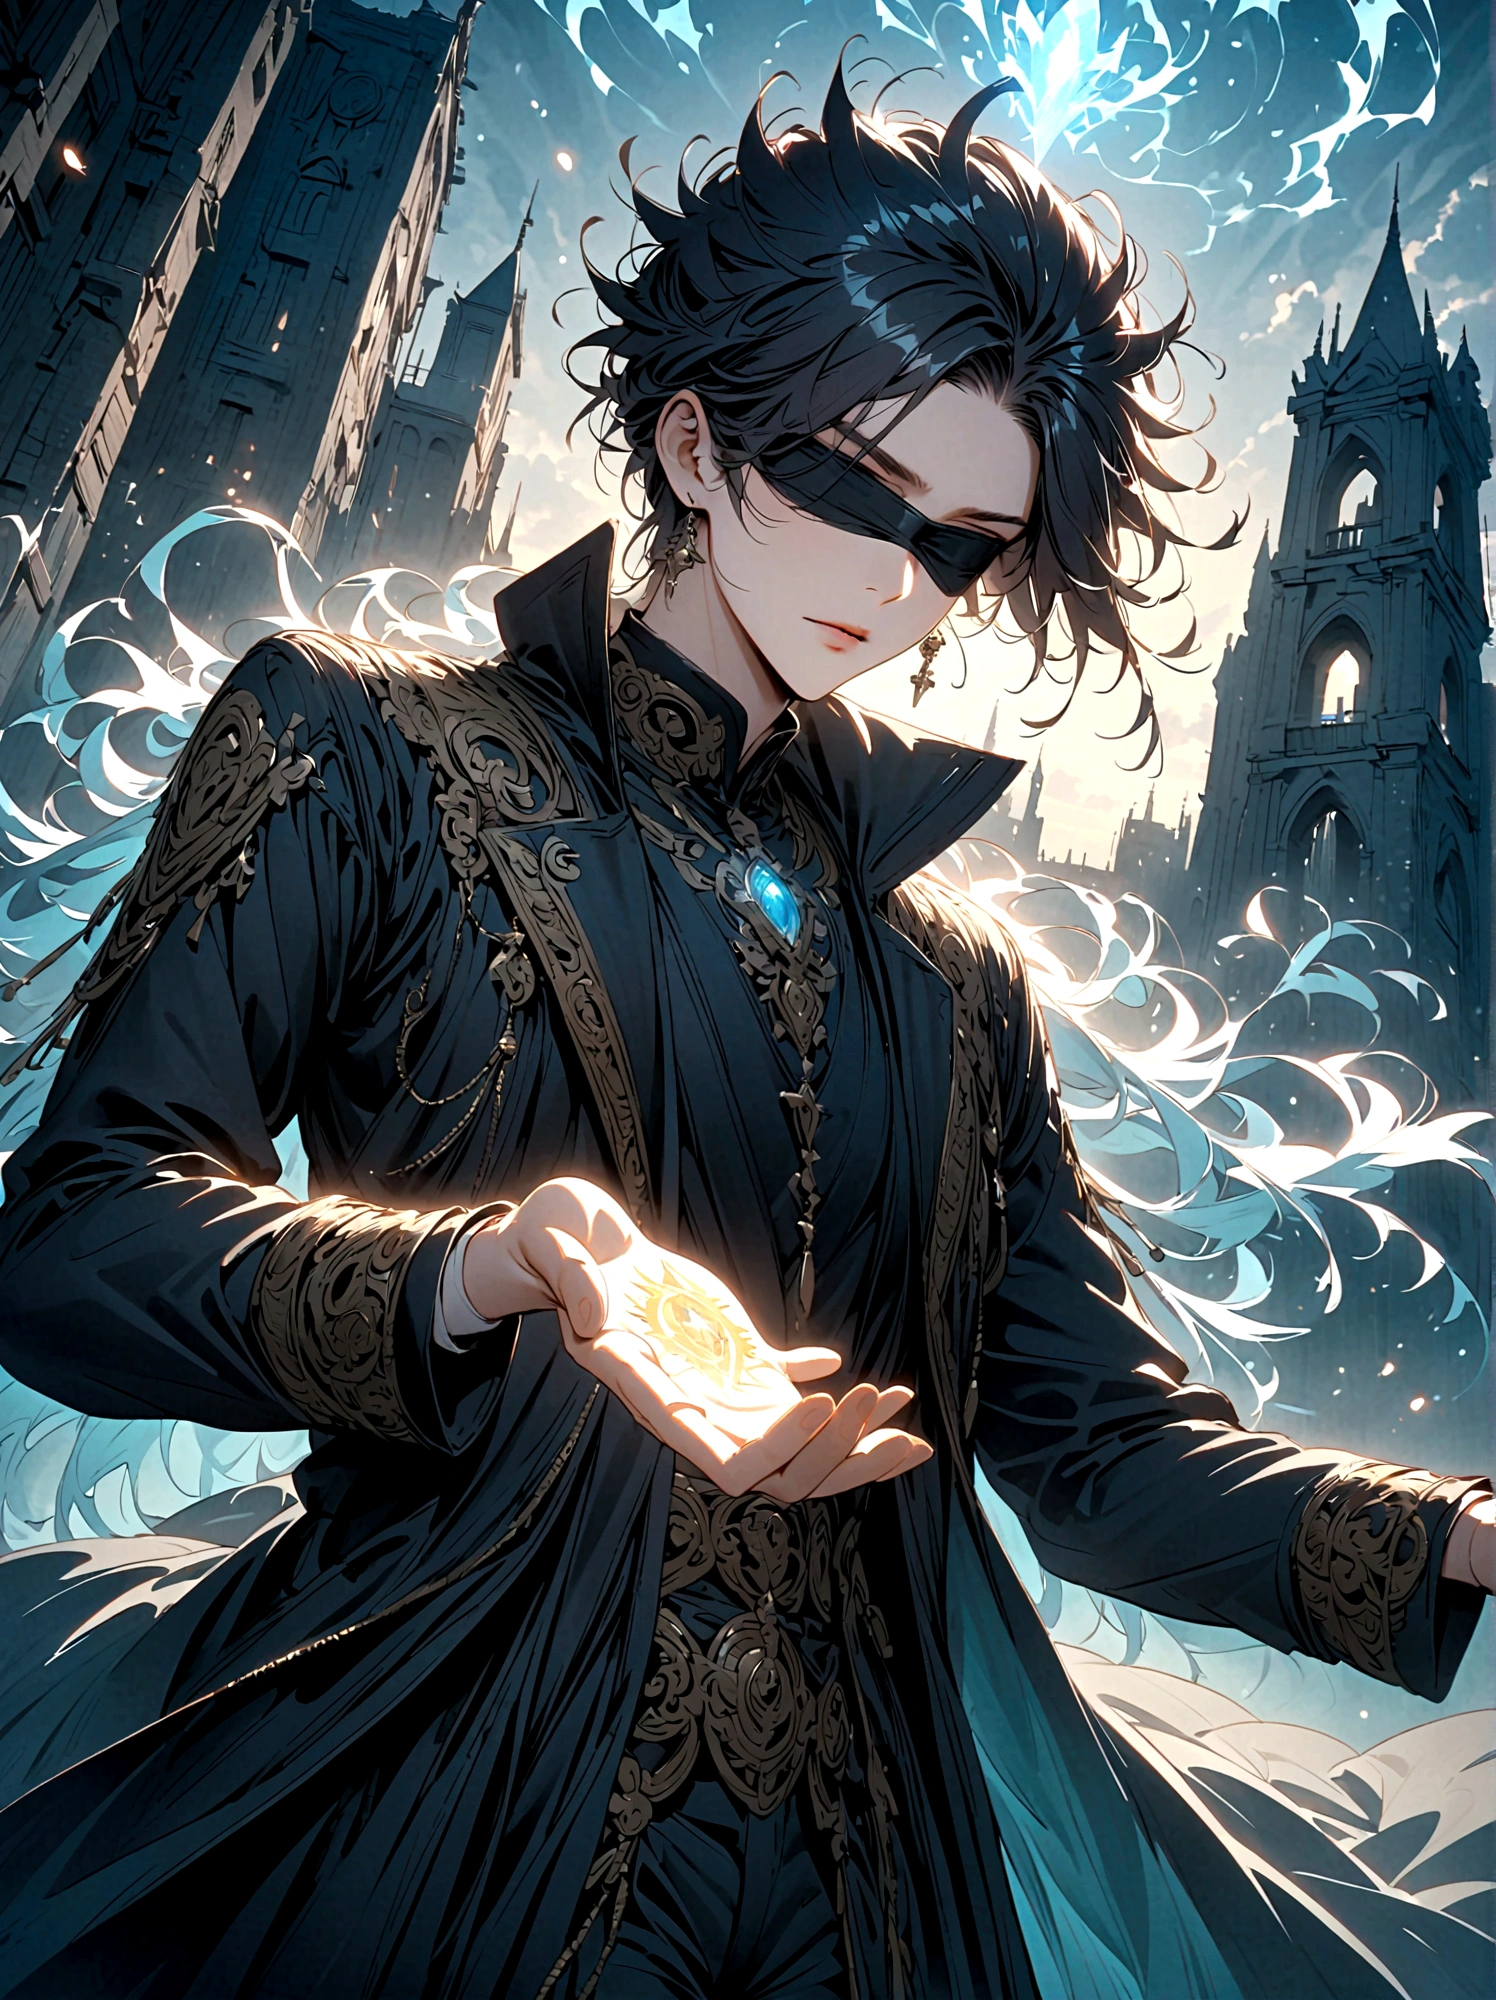 A tall individual with striking white spiky hair, dressed in a black coat. Their eyes are obscured by a blindfold, yet they radiate an aura of power. They perform mystic hand gestures as if to invoke some sort of magic spell. The setting around them is an urban area with a hint of ancient mystical charm.